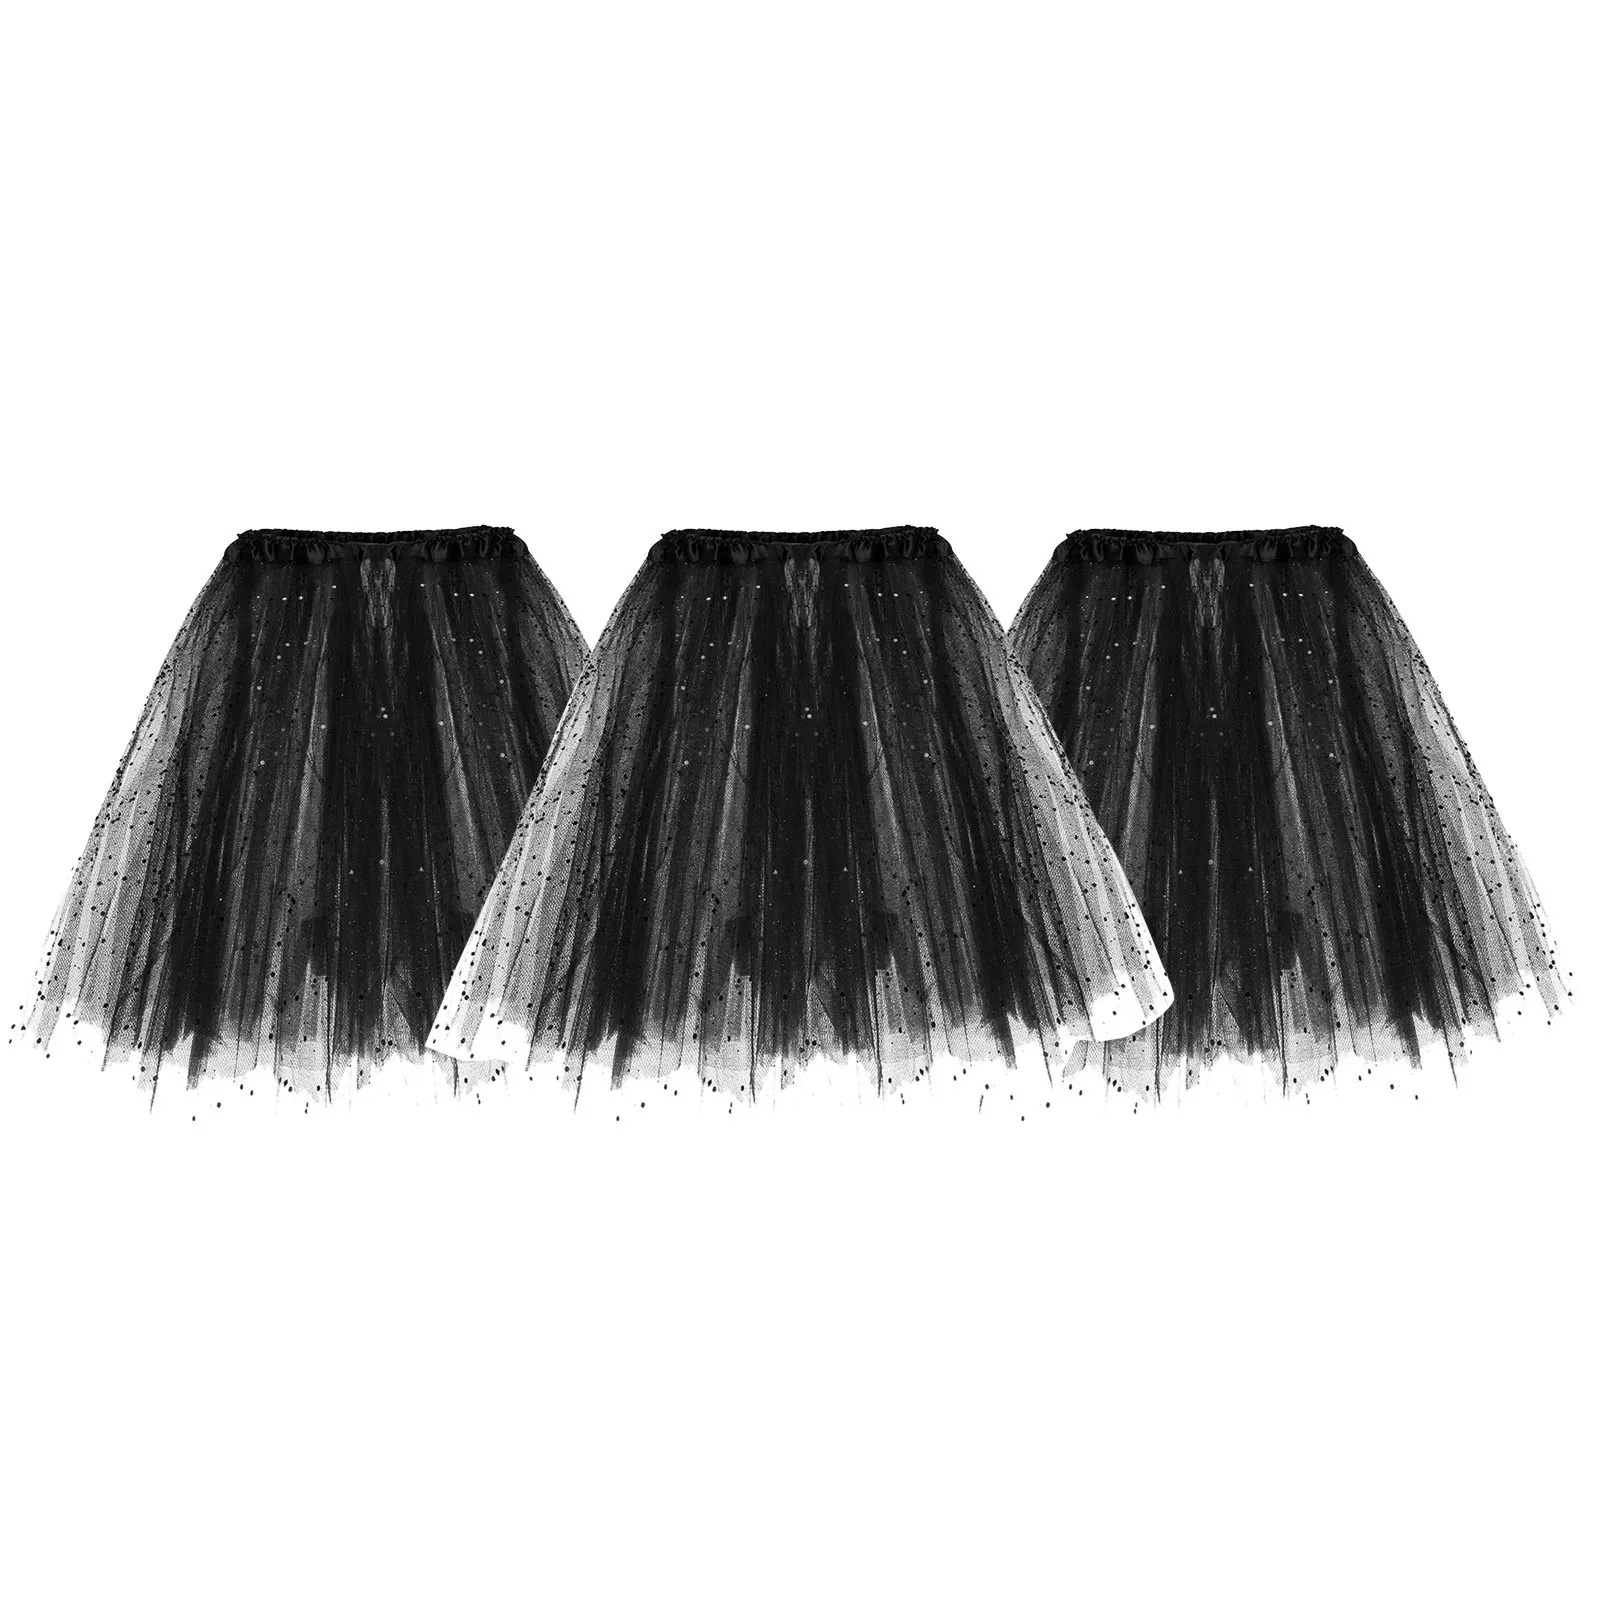 

3Pcs Women's Lace Up Mesh Tutu Skirt Vintage Multi-Layered Petticoat Puffy Tulle Party Mini Skirts Stretchy Dancing Ballet Skirt